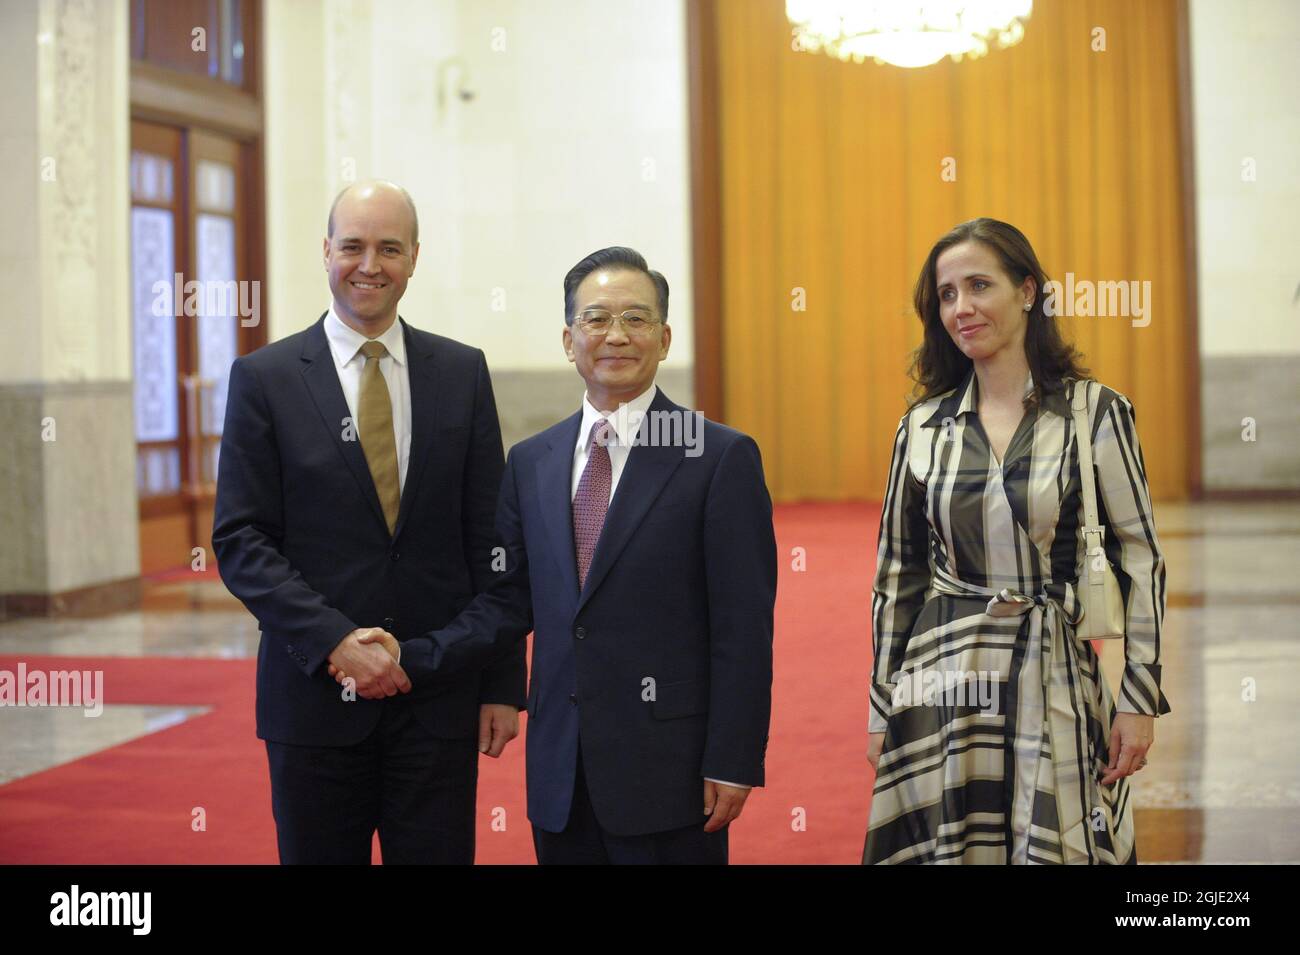 Swedish Prime Minister Fredrik Reinfeldt and his wife Filippa is welcomed to the Great Hall of the People by Prime Minister Wen Jiabao of China in Beijing, China. Stock Photo